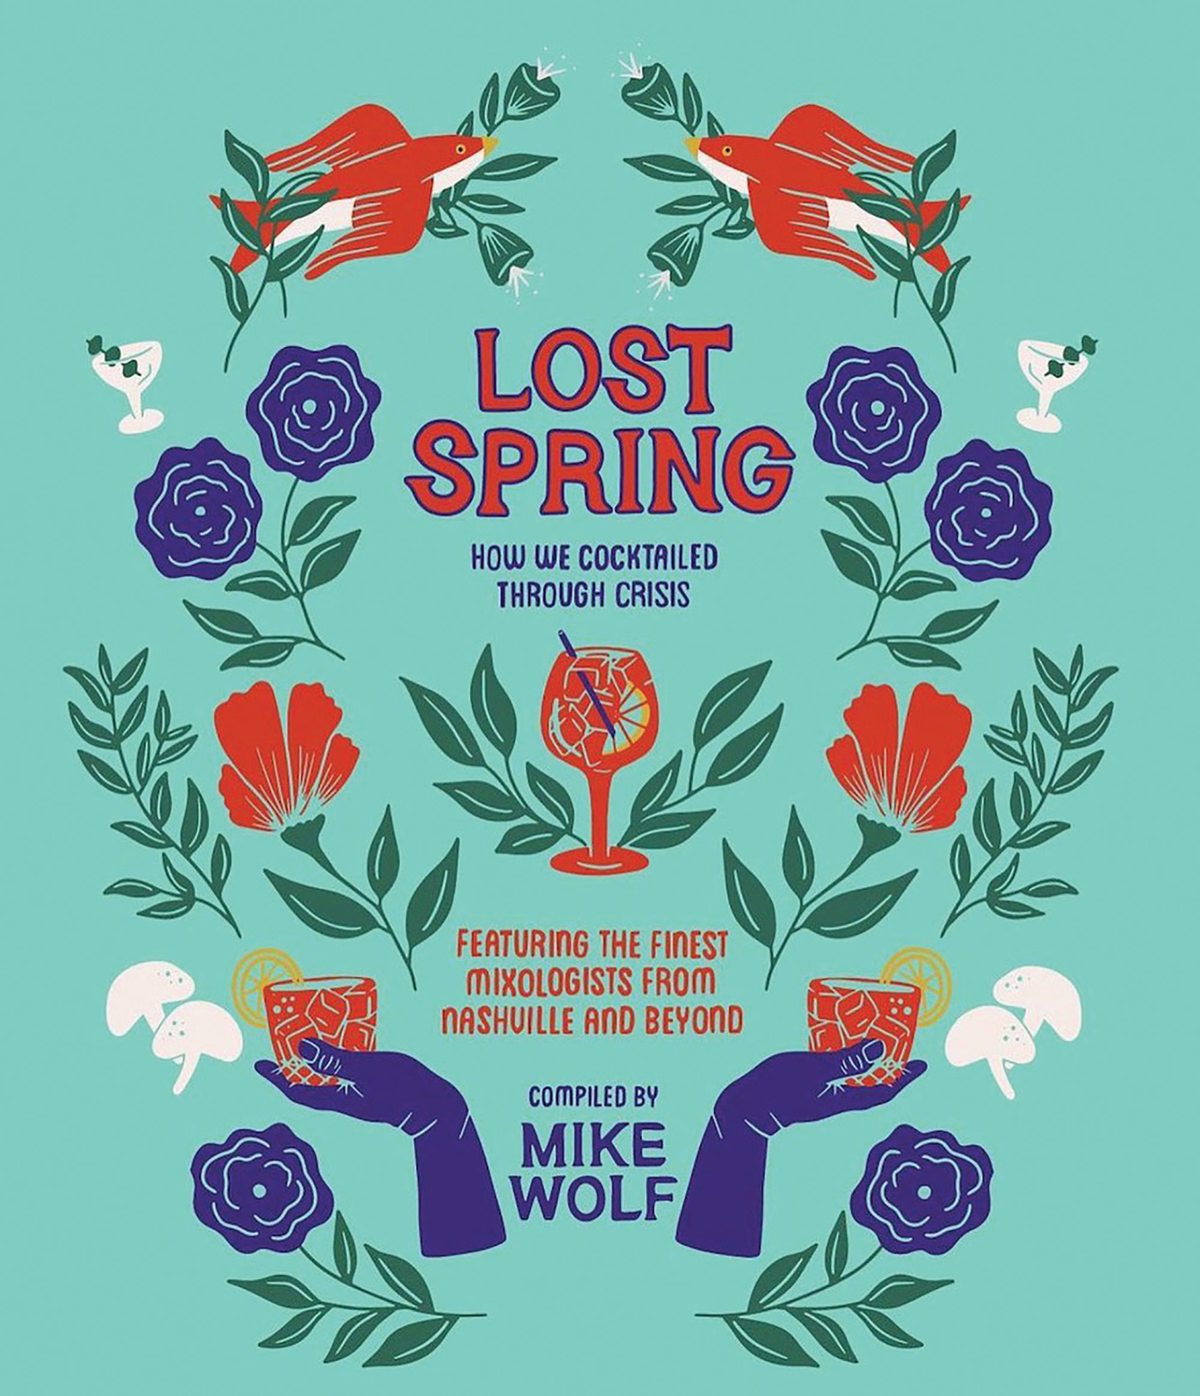 Mike Wolf’s Cocktail Compilation <i>Lost Spring</i> Benefits Hospitality Workers